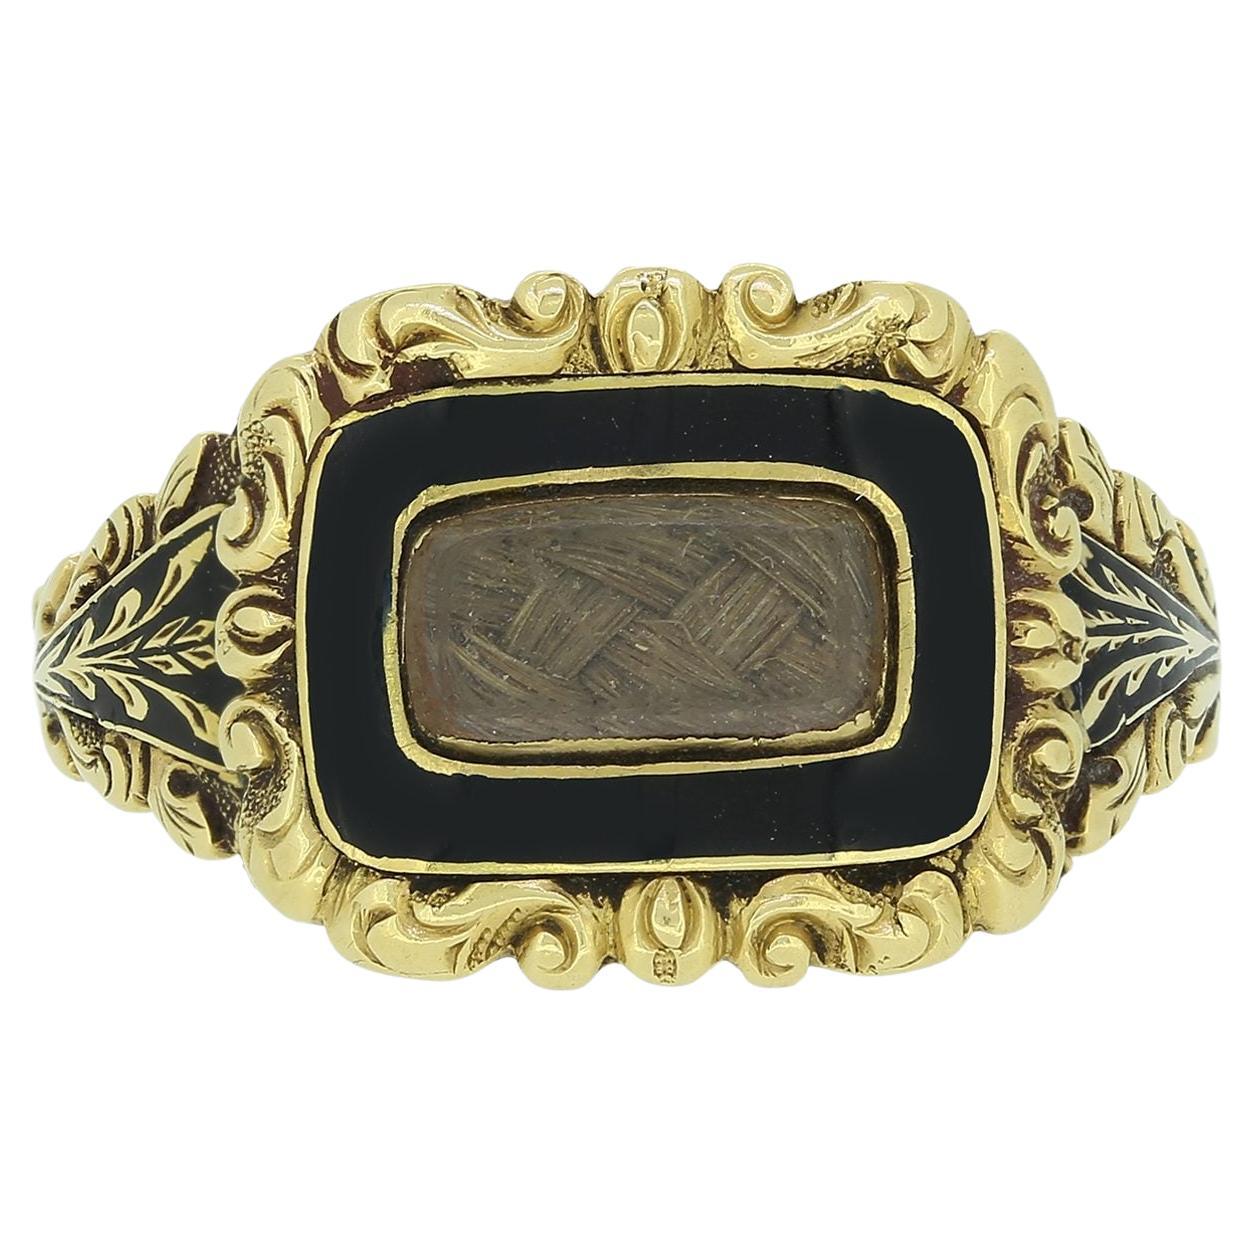 Early Victorian 1830s Hair Locket Black Enamel Mourning Ring For Sale